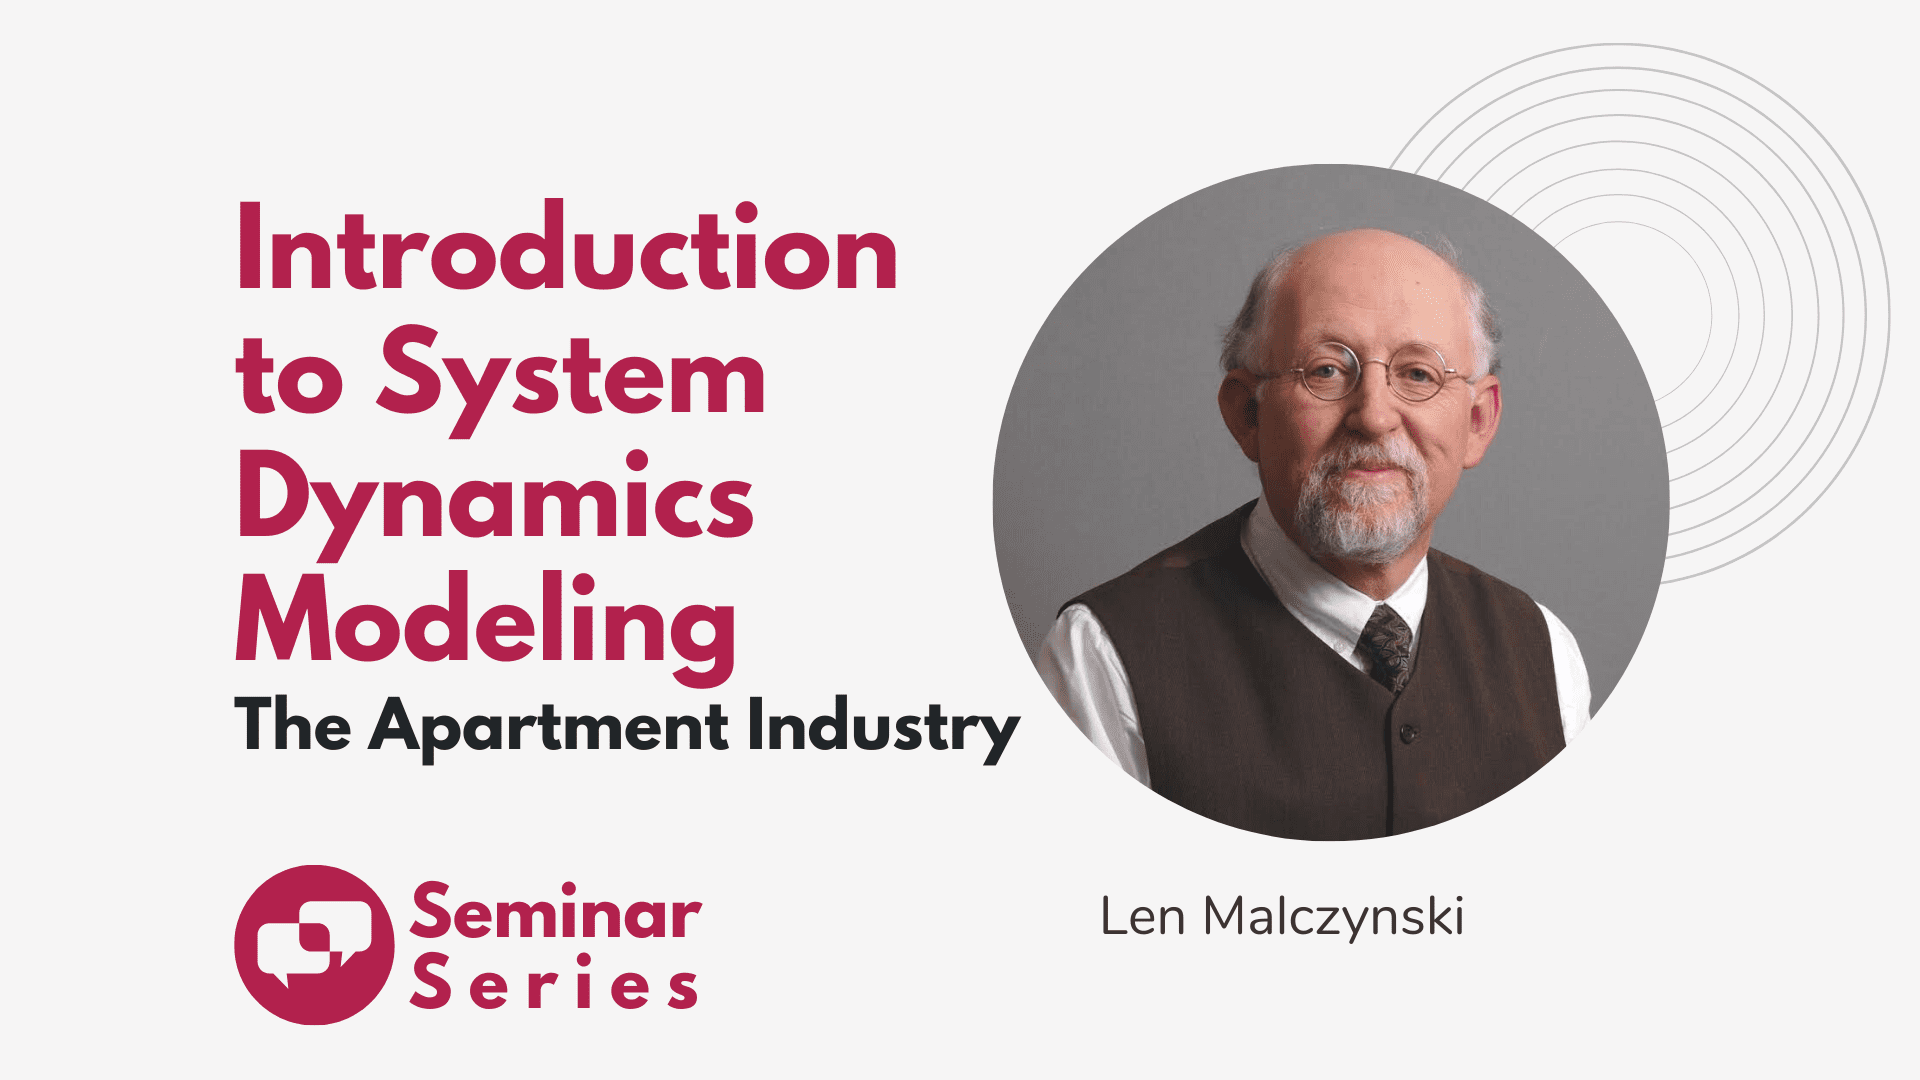 Introduction to System Dynamics Modeling